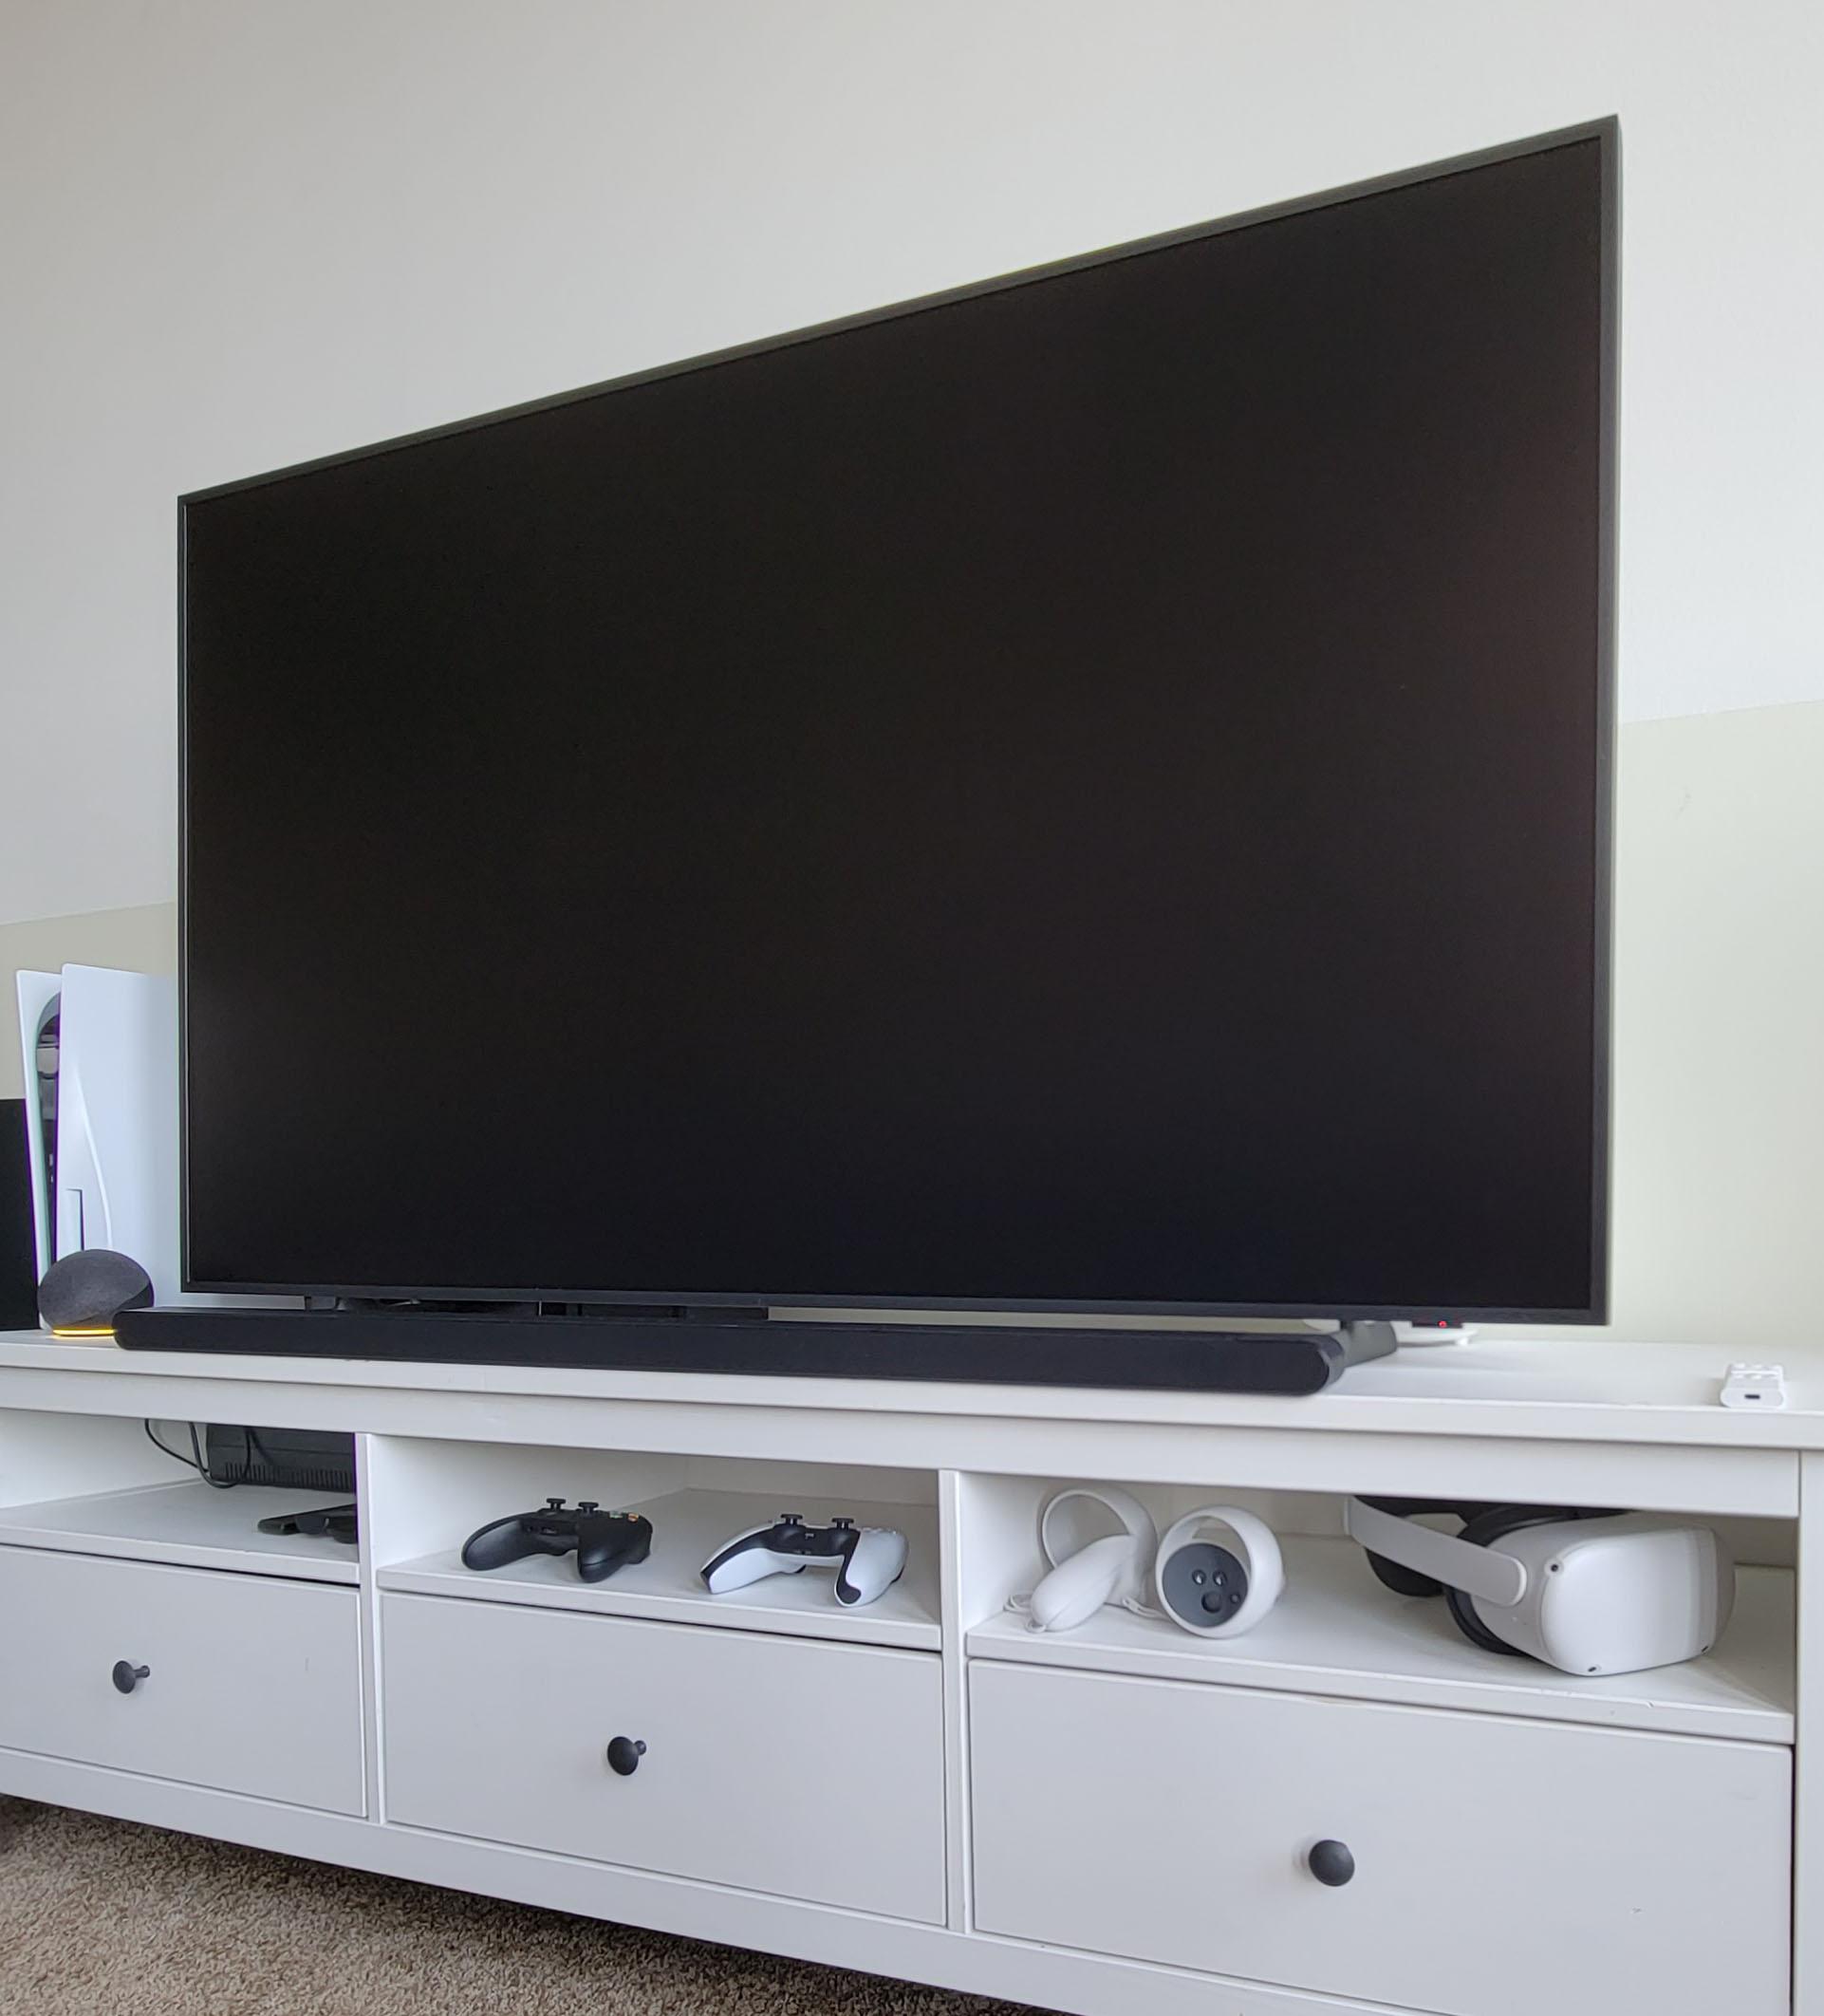 It's an excellent TV that thrives in brightly lit living rooms 0aee5f1a the frame off